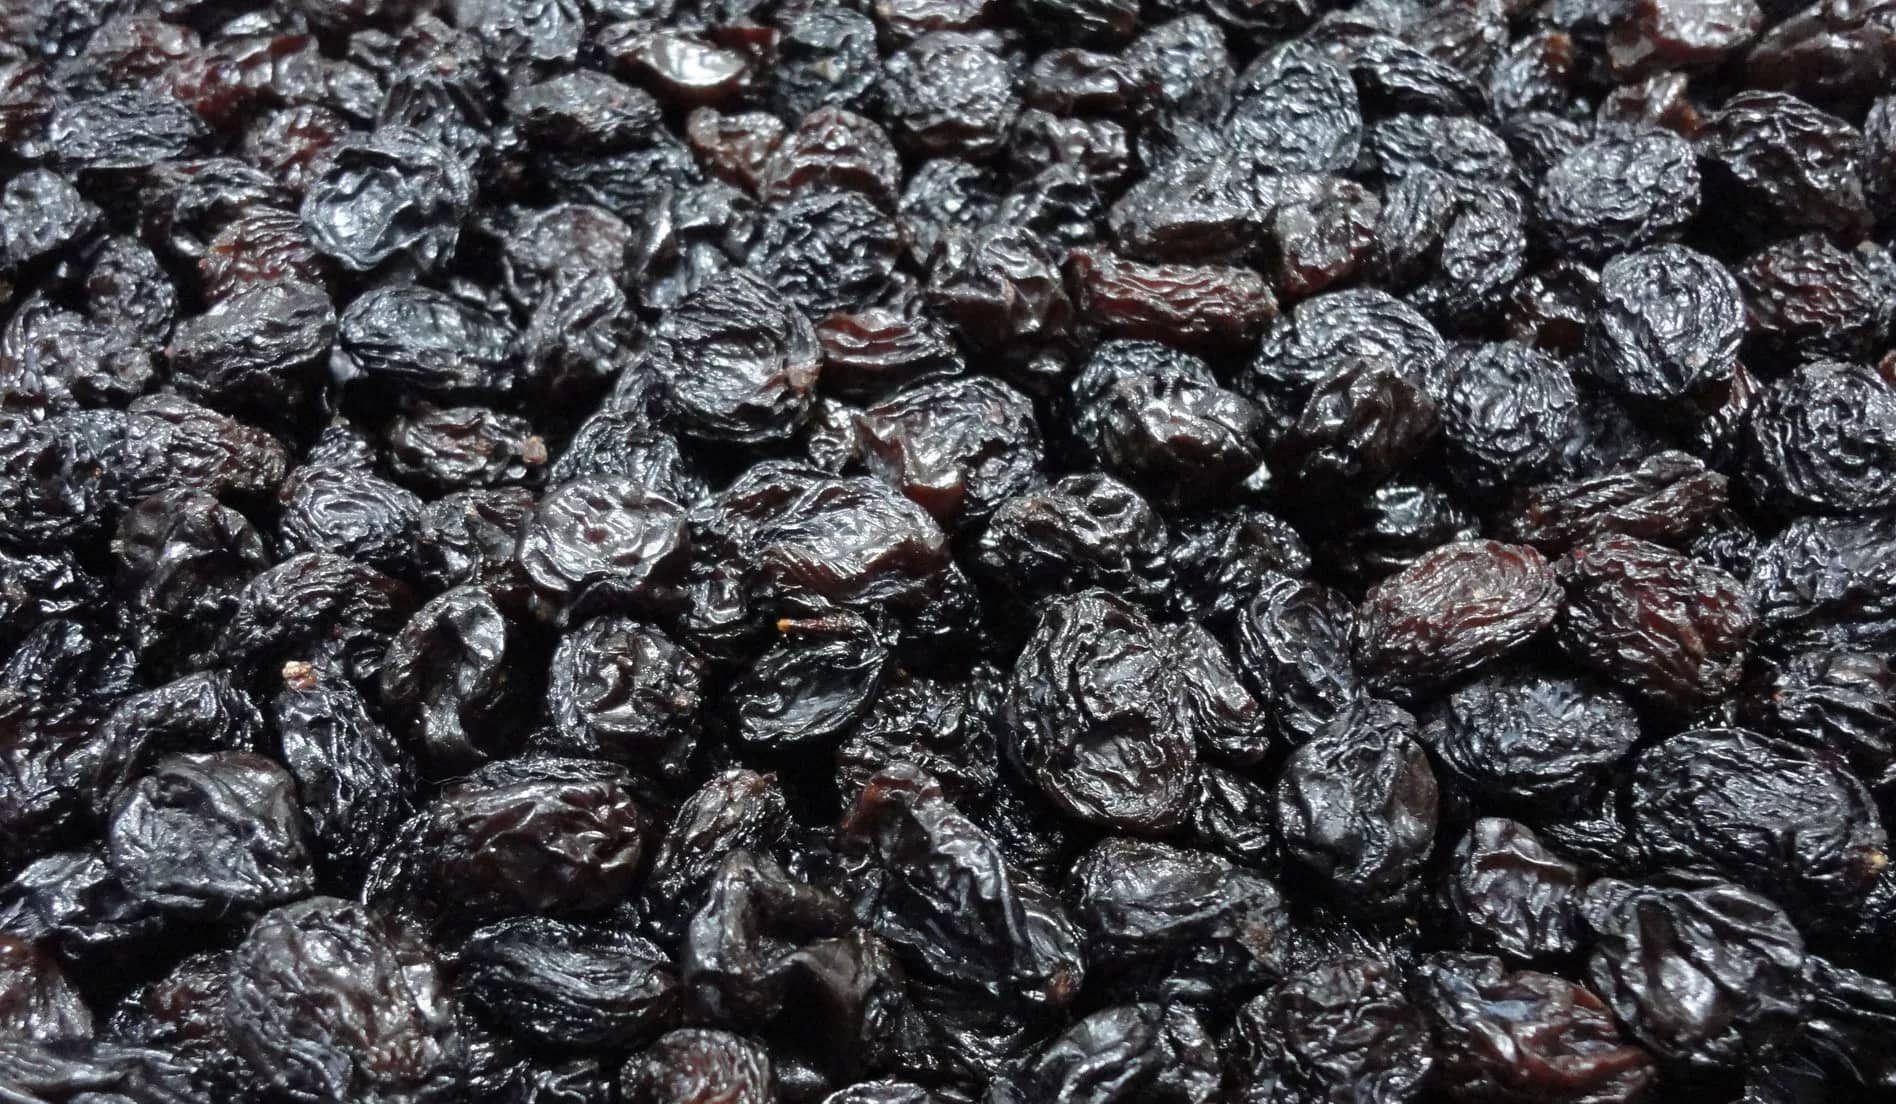  Getting To Know Raisins For Health + The Exceptional Price of Buying Raisins For Health 